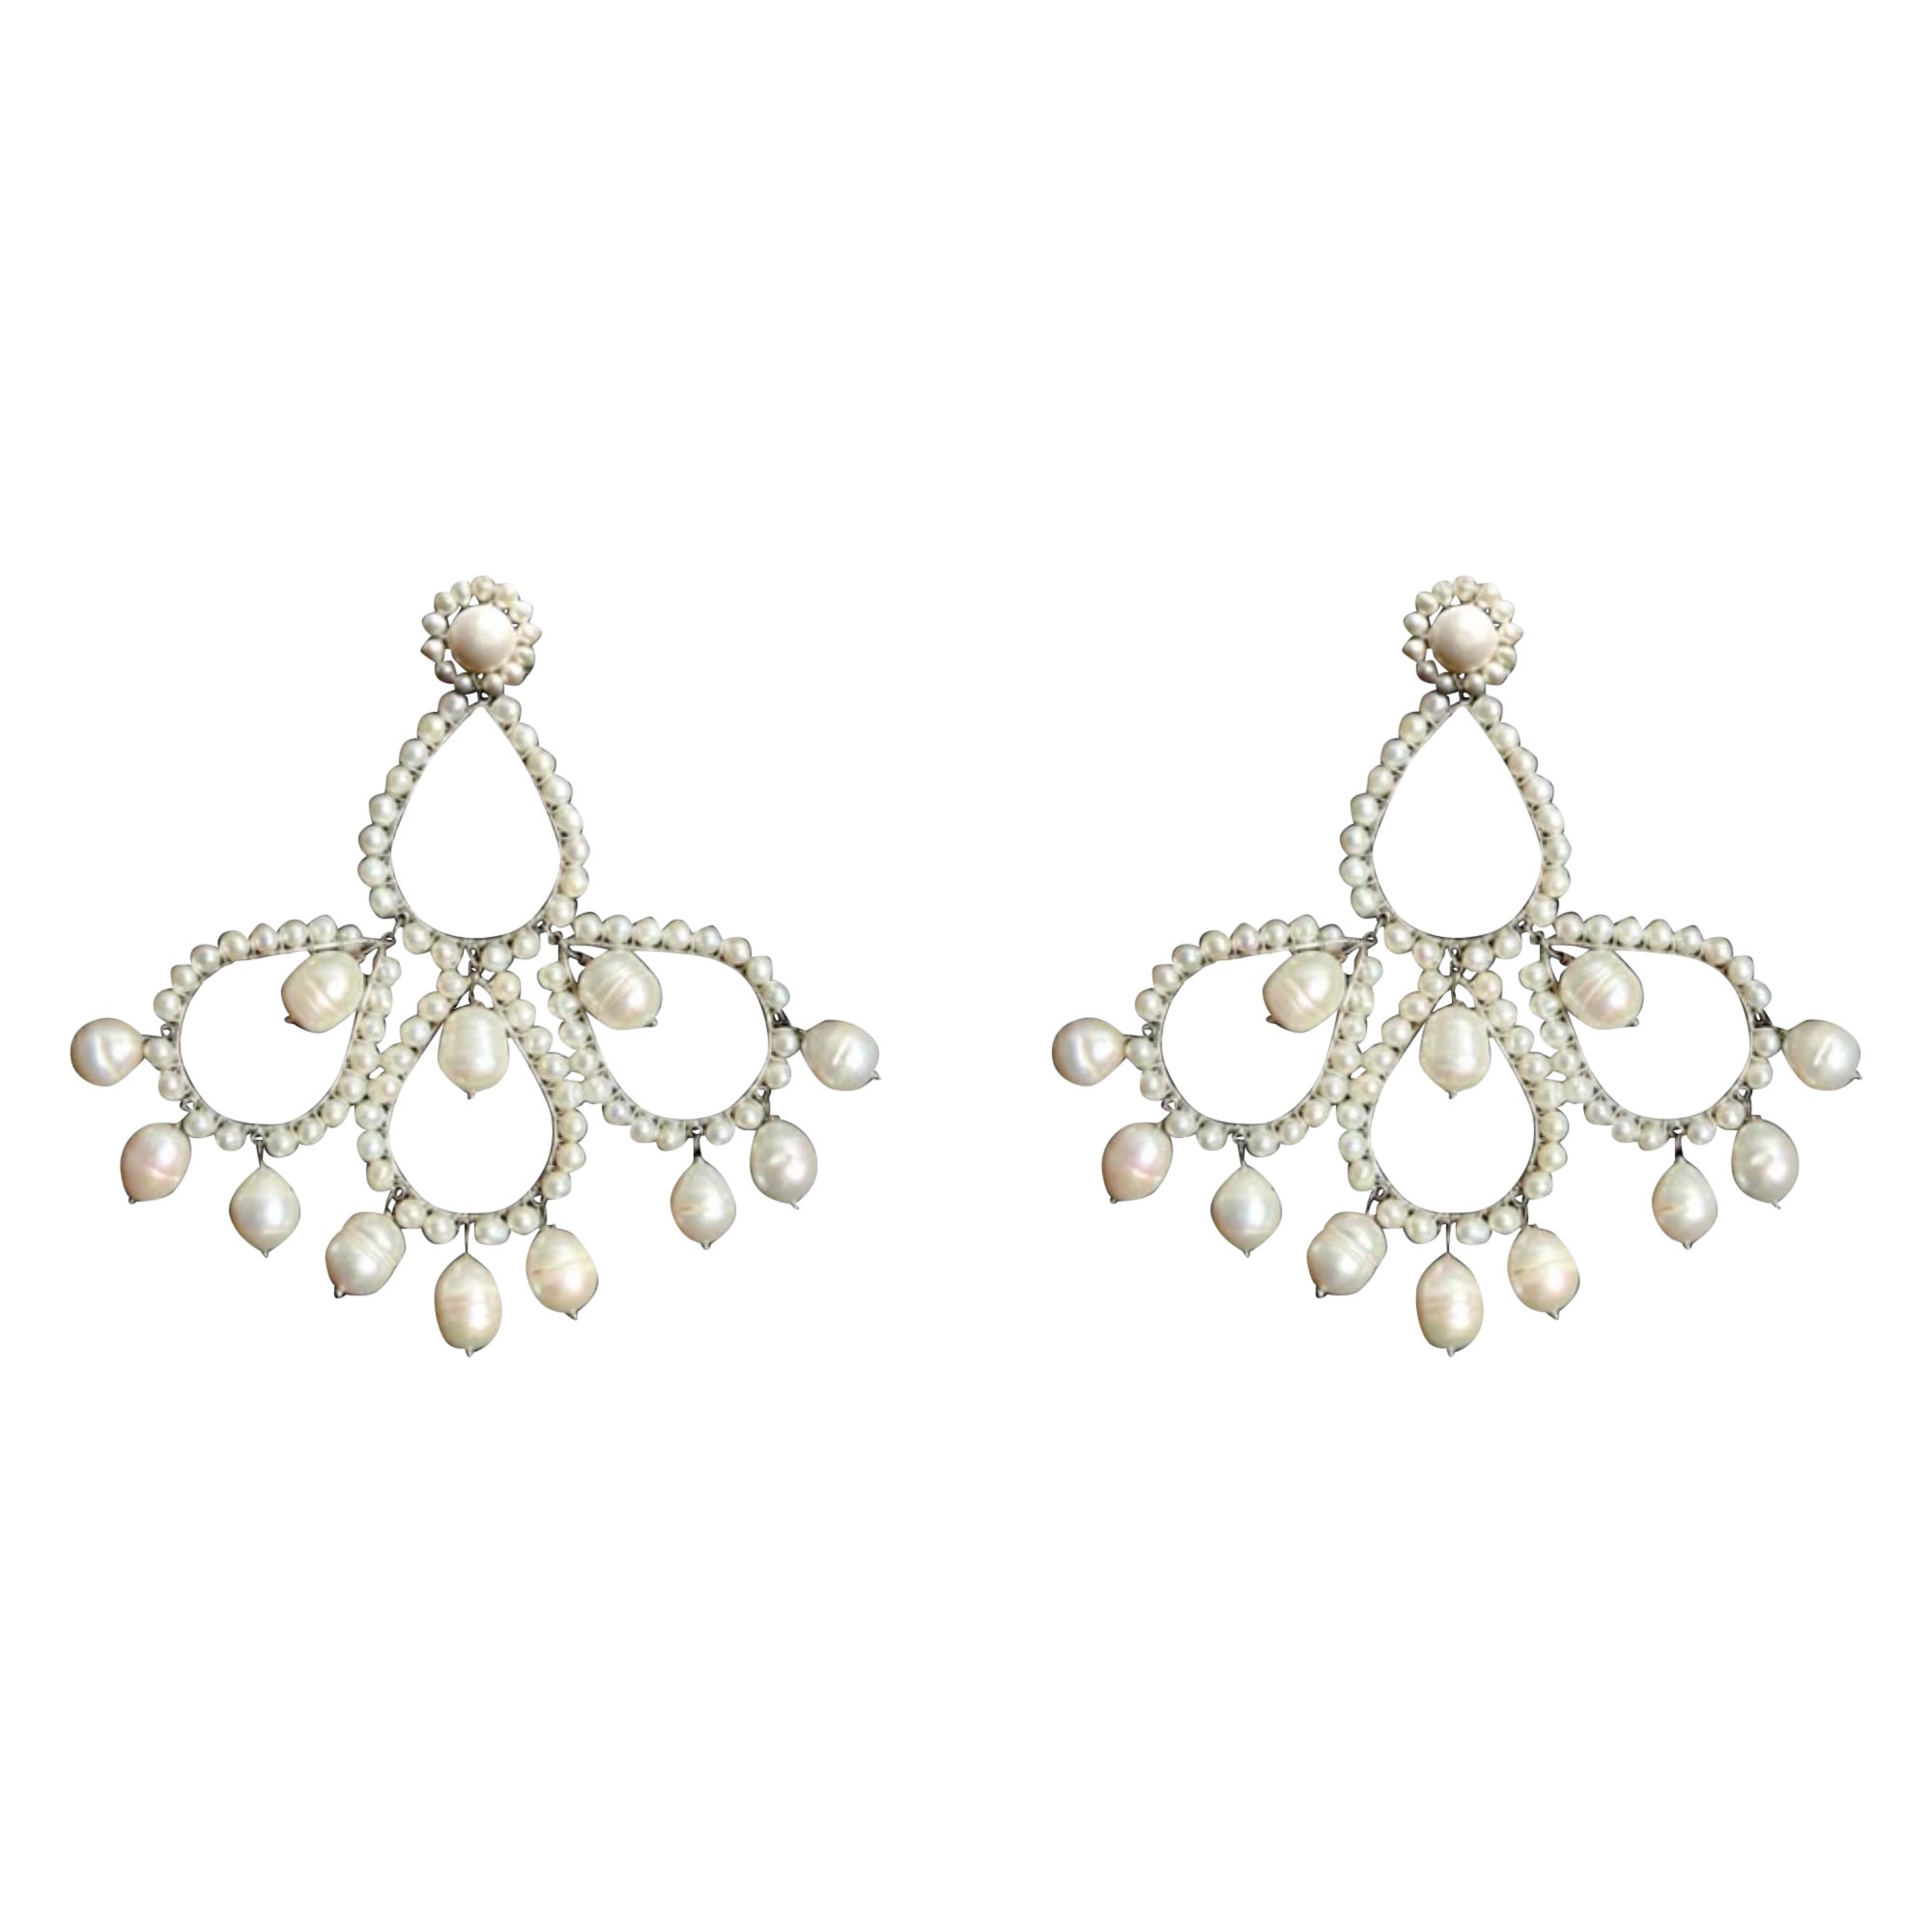 Oversized Freshwater and Baroque Chandelier Pearl Earrings